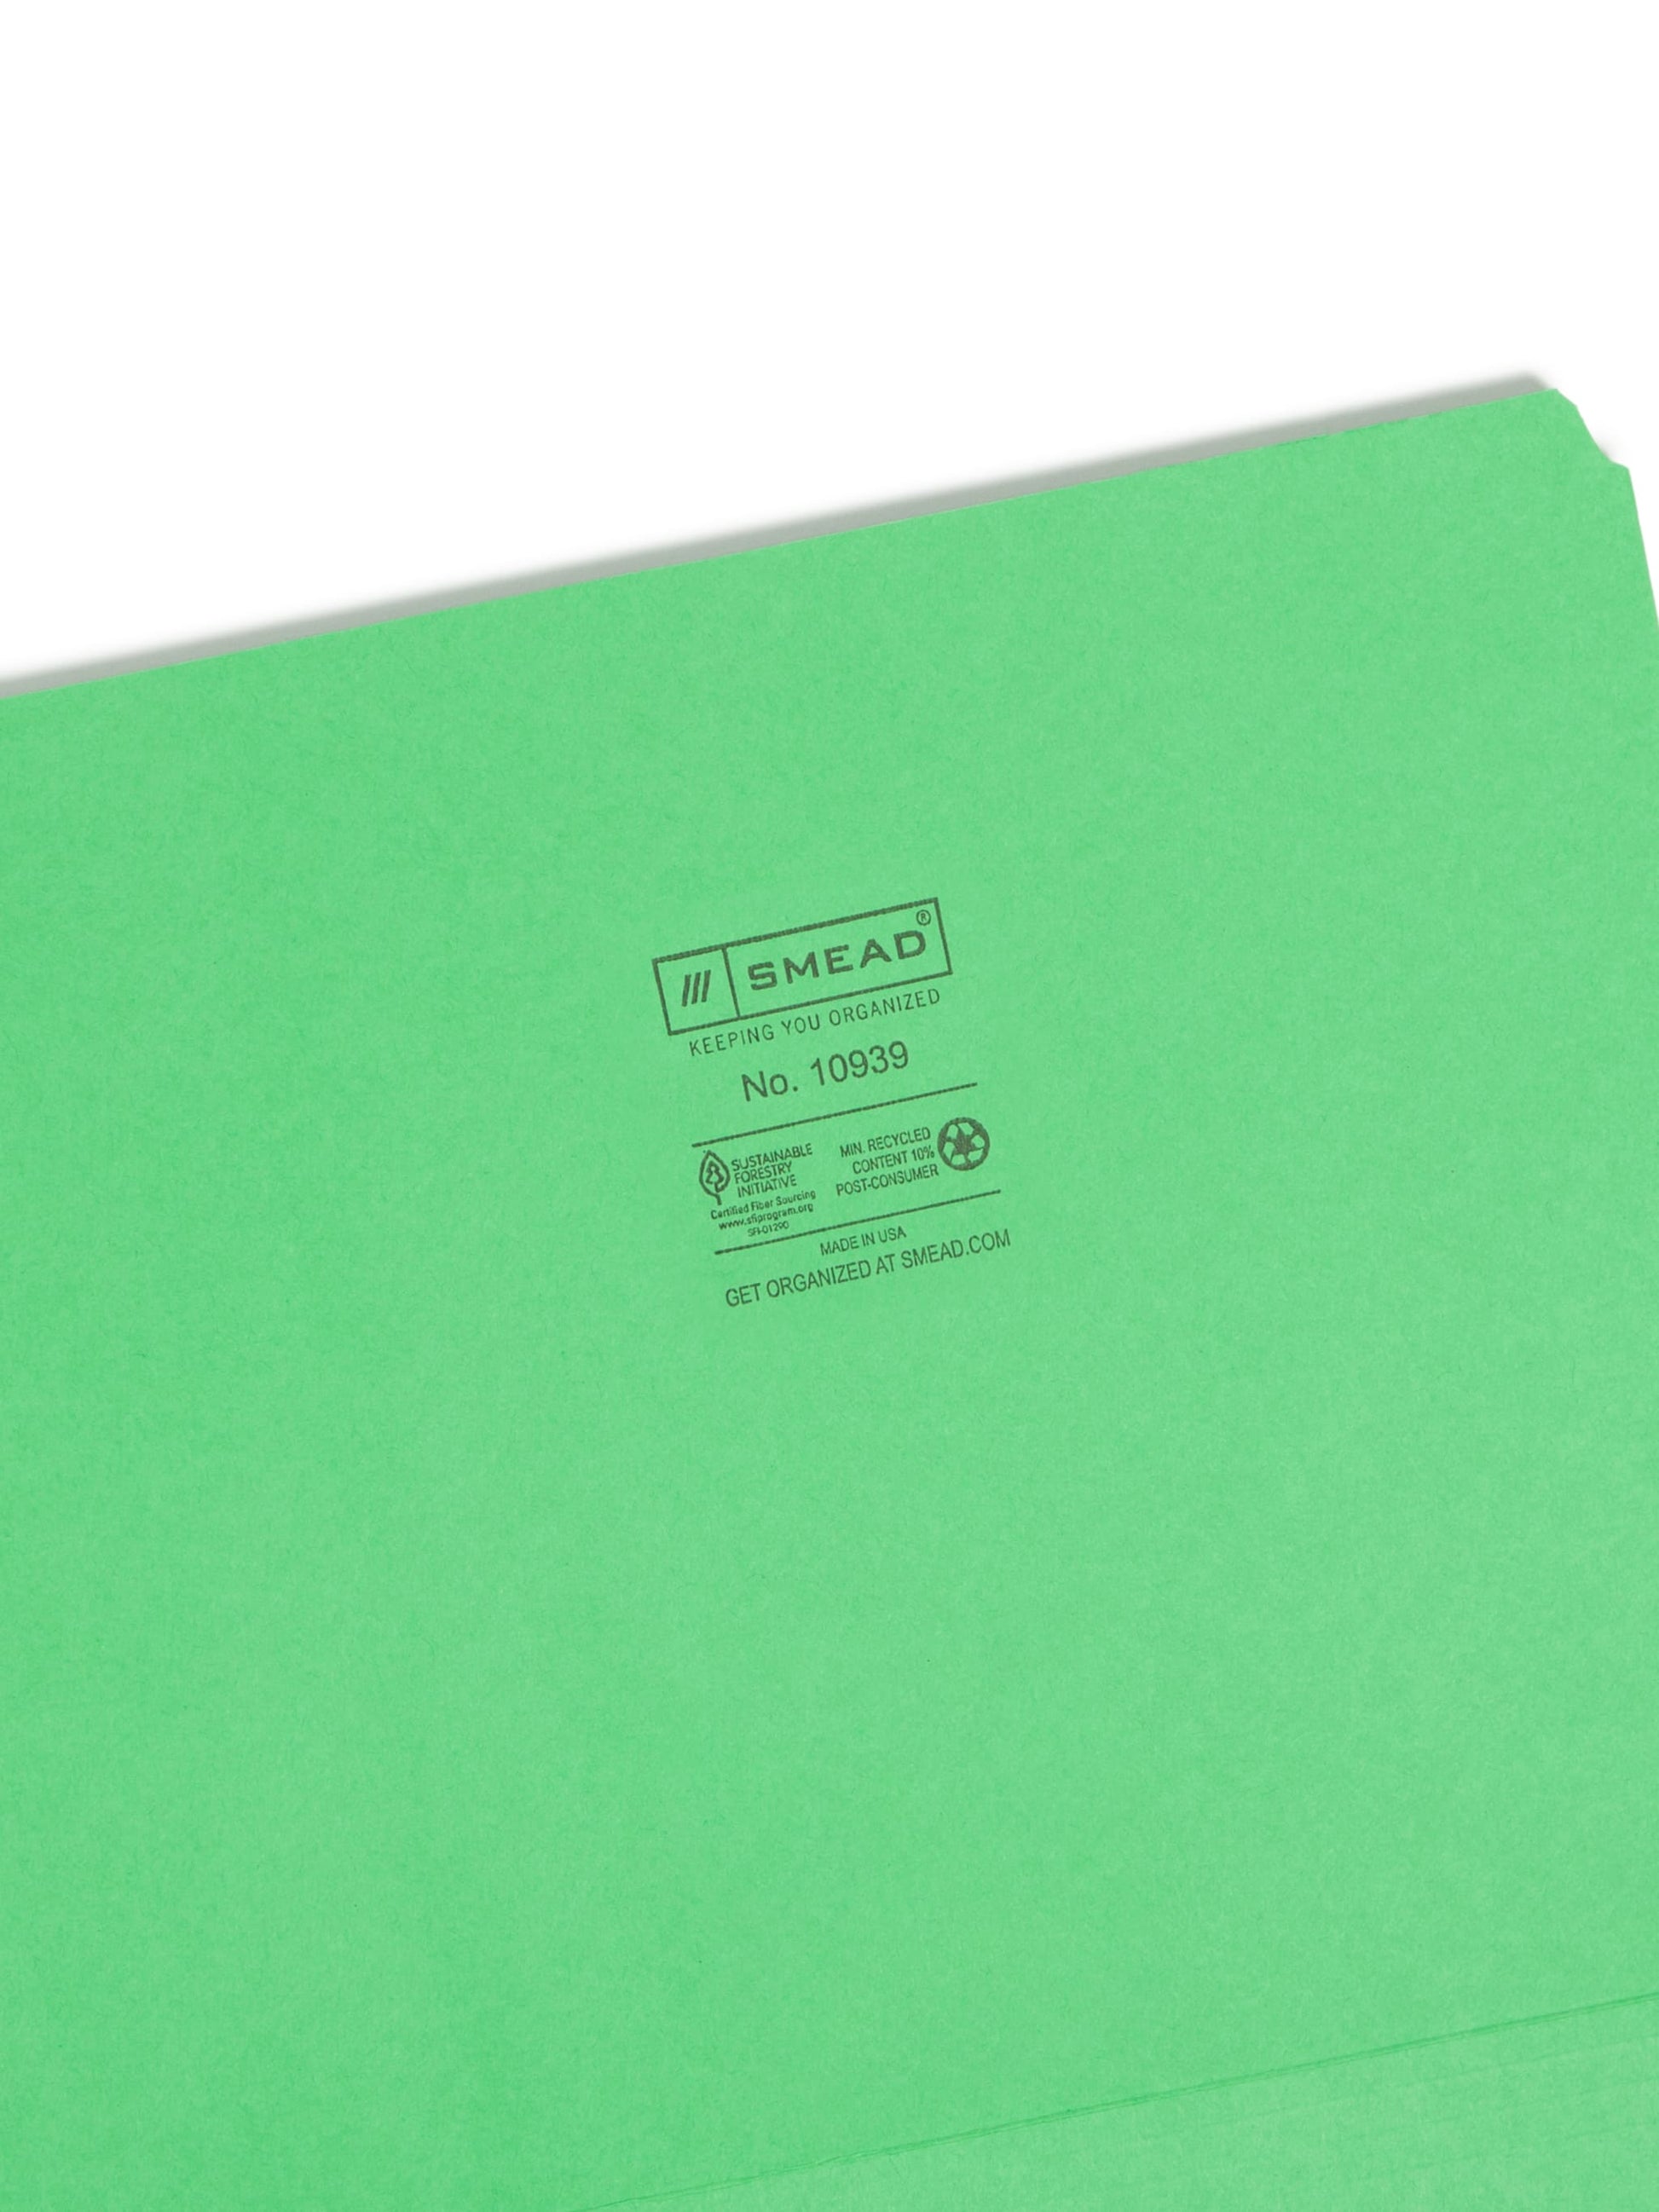 Standard File Folders, Straight-Cut Tab, Green Color, Letter Size, Set of 100, 086486109390